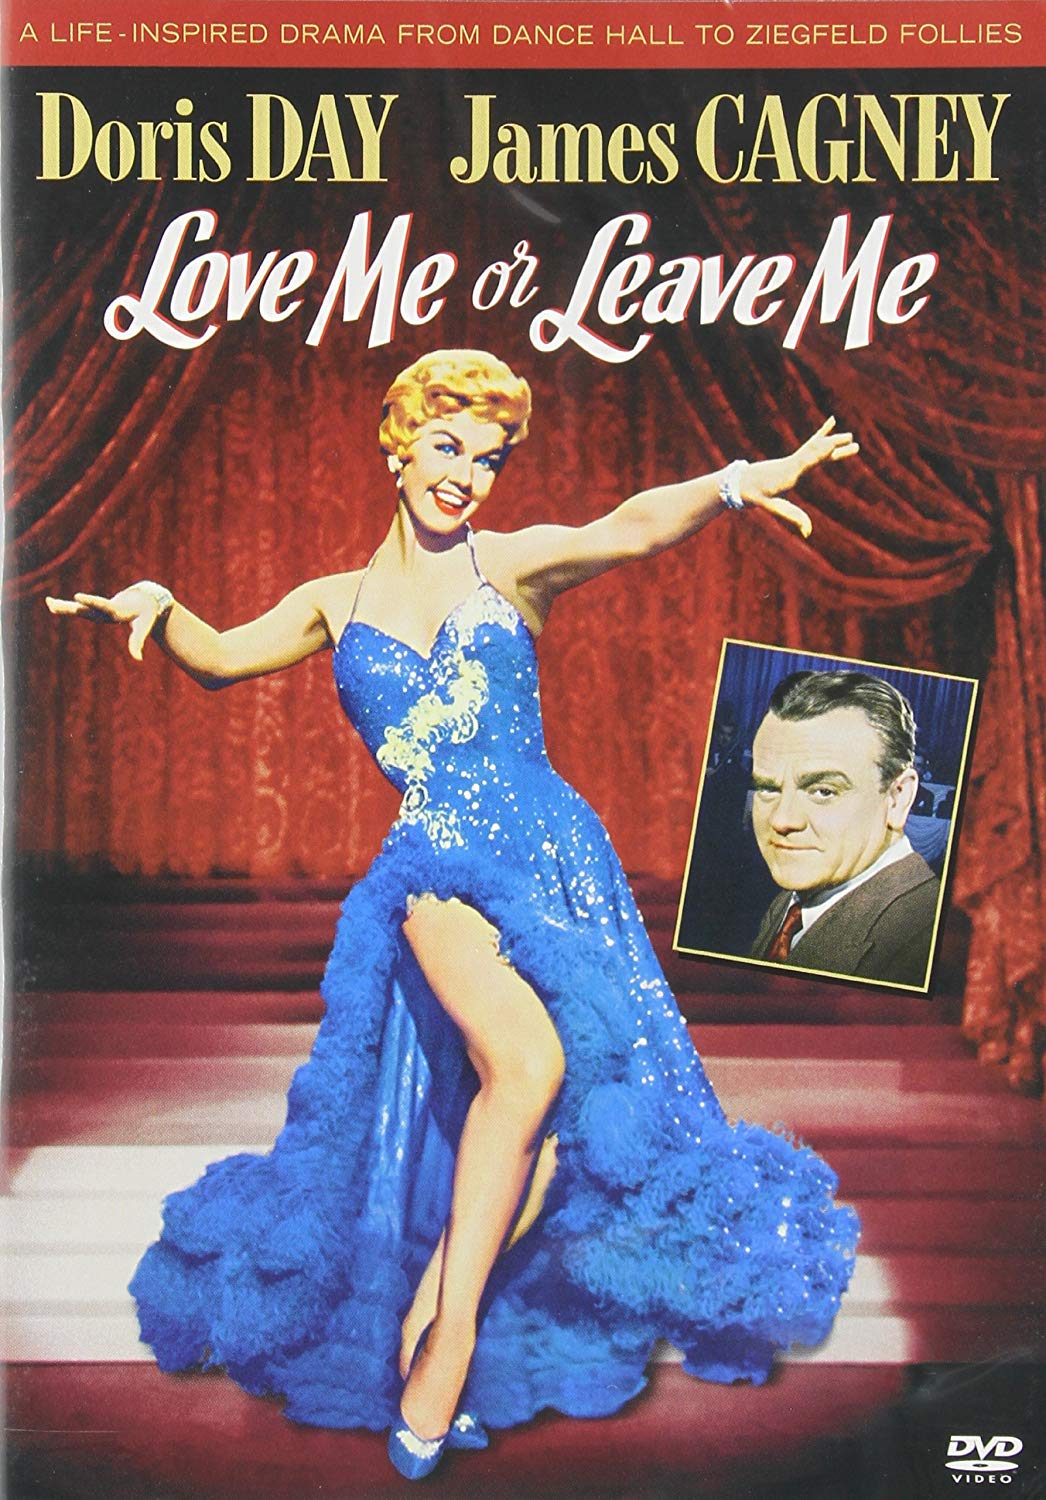 Love me or leave me [DVD] (1955).  Directed by Charles Vidor.